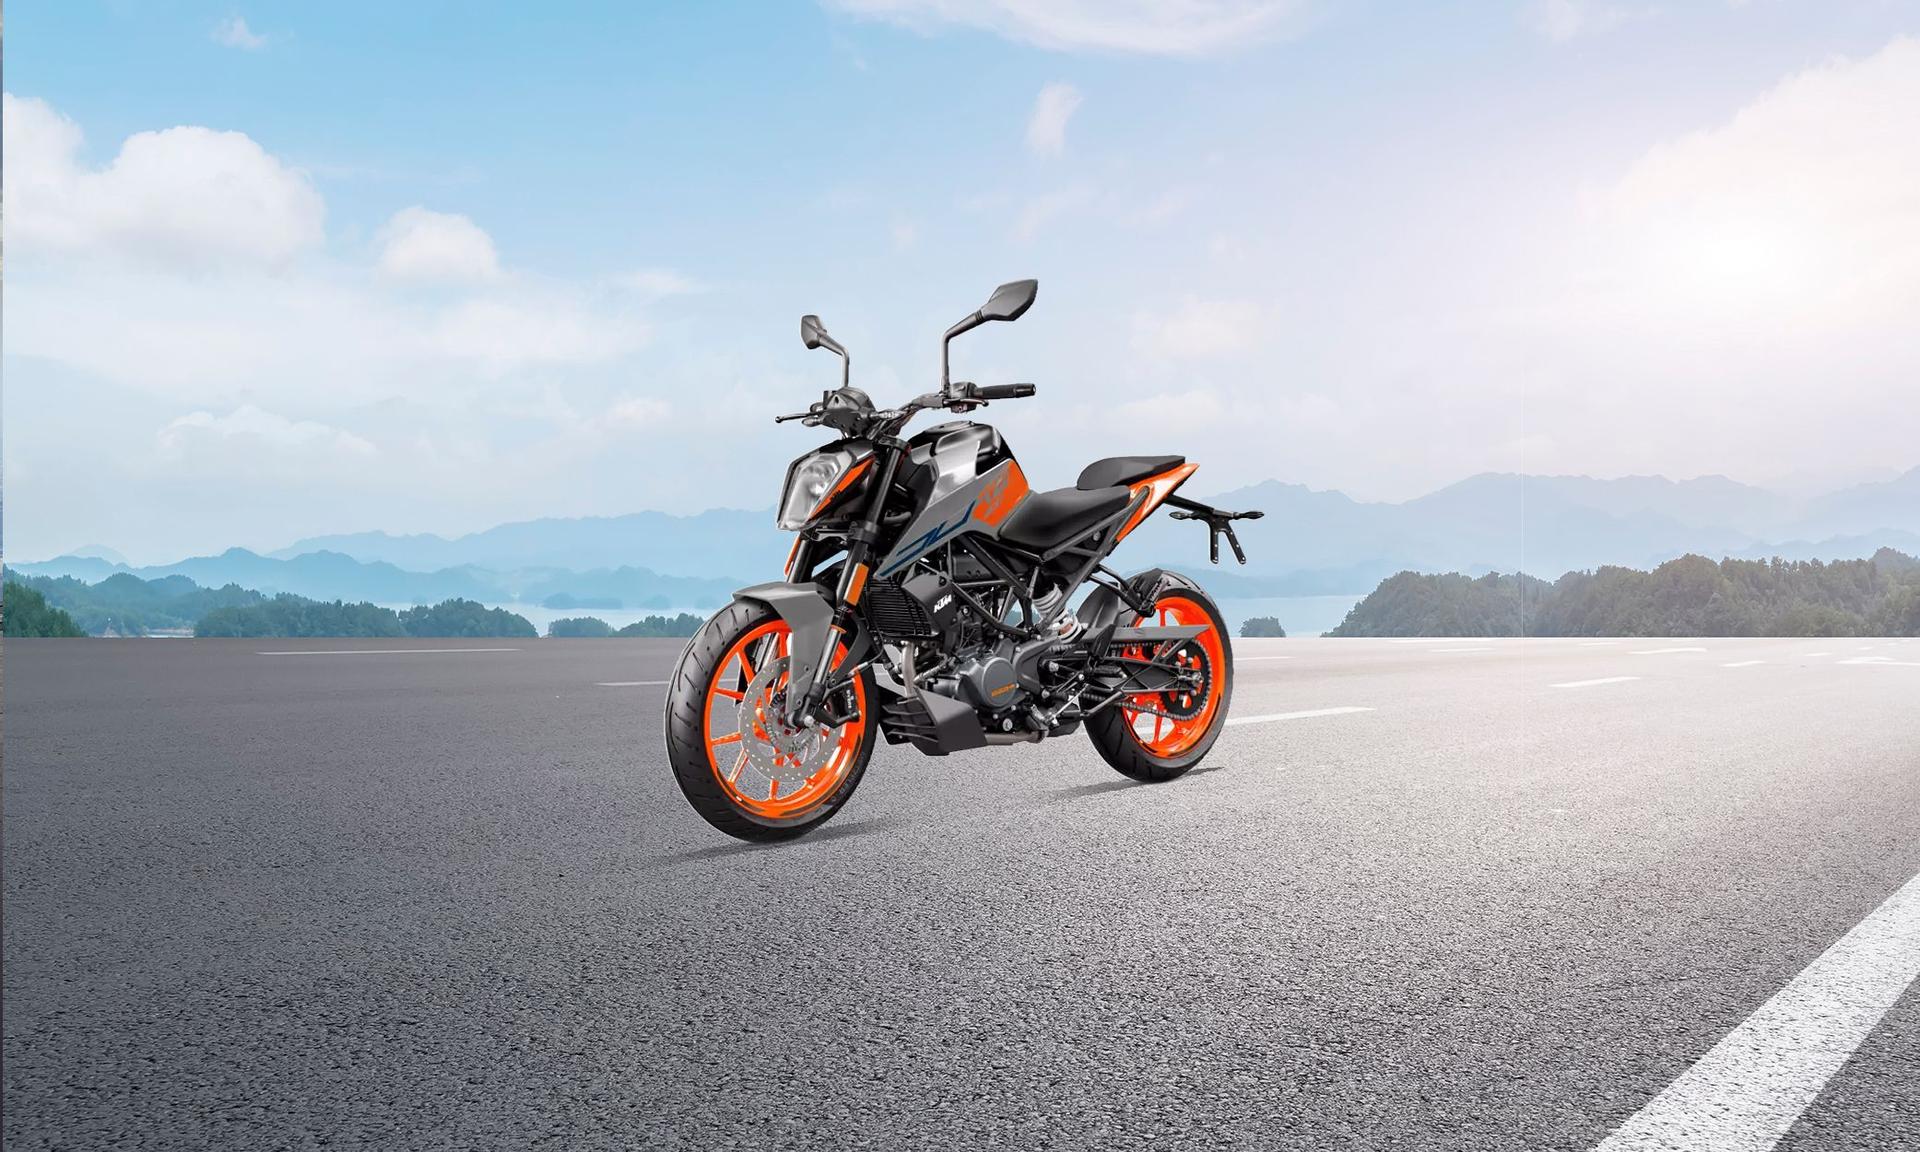 For 2023, KTM has added the same LED headlight as seen on the 390 and 250 Duke models to the 200 Duke.